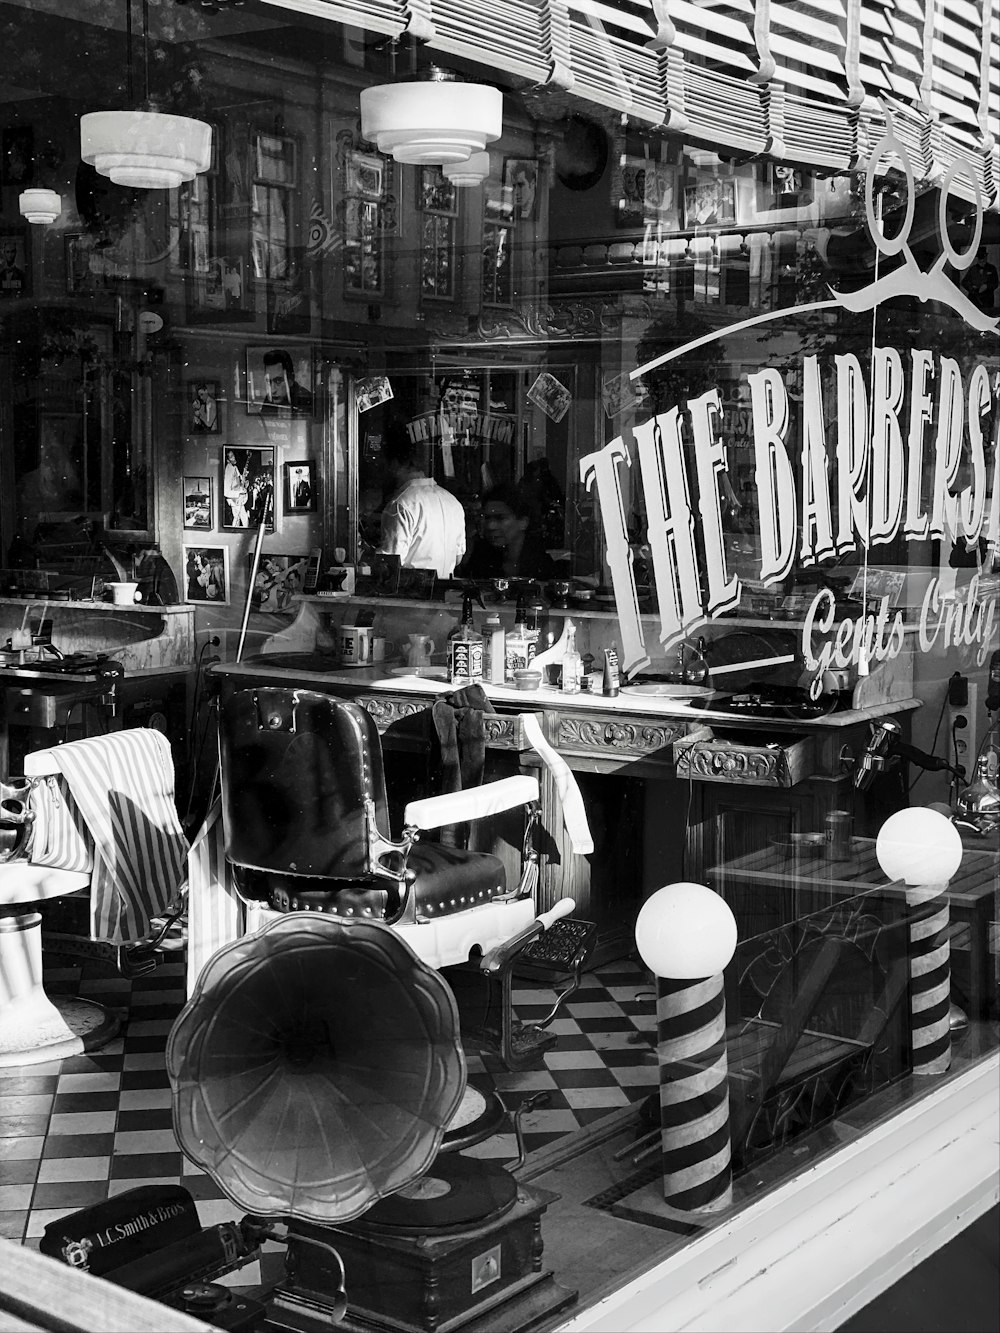 The Barbers store in grayscale photography